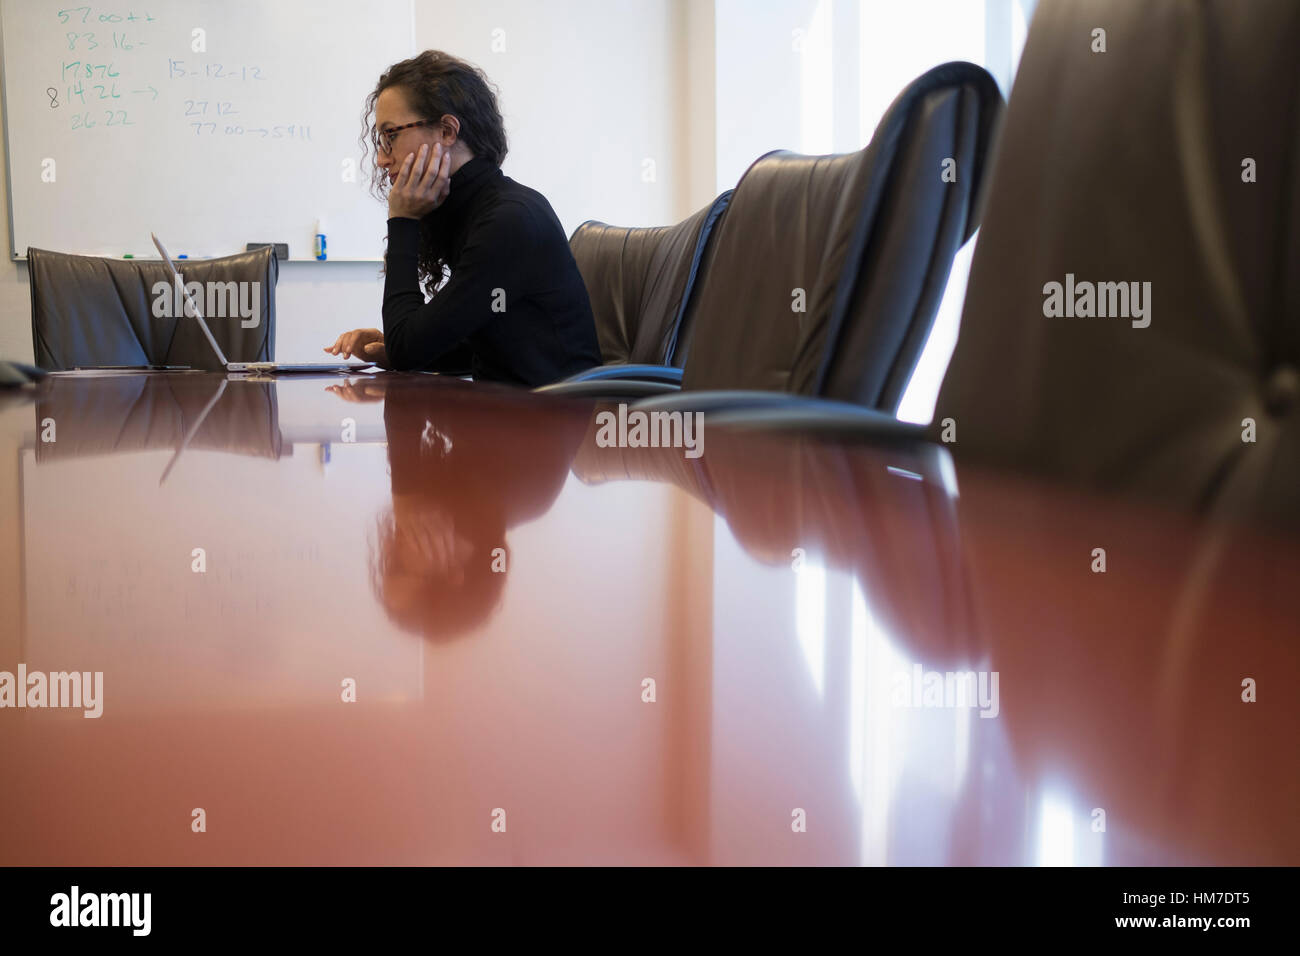 Young business woman sitting in conference room with laptop Banque D'Images